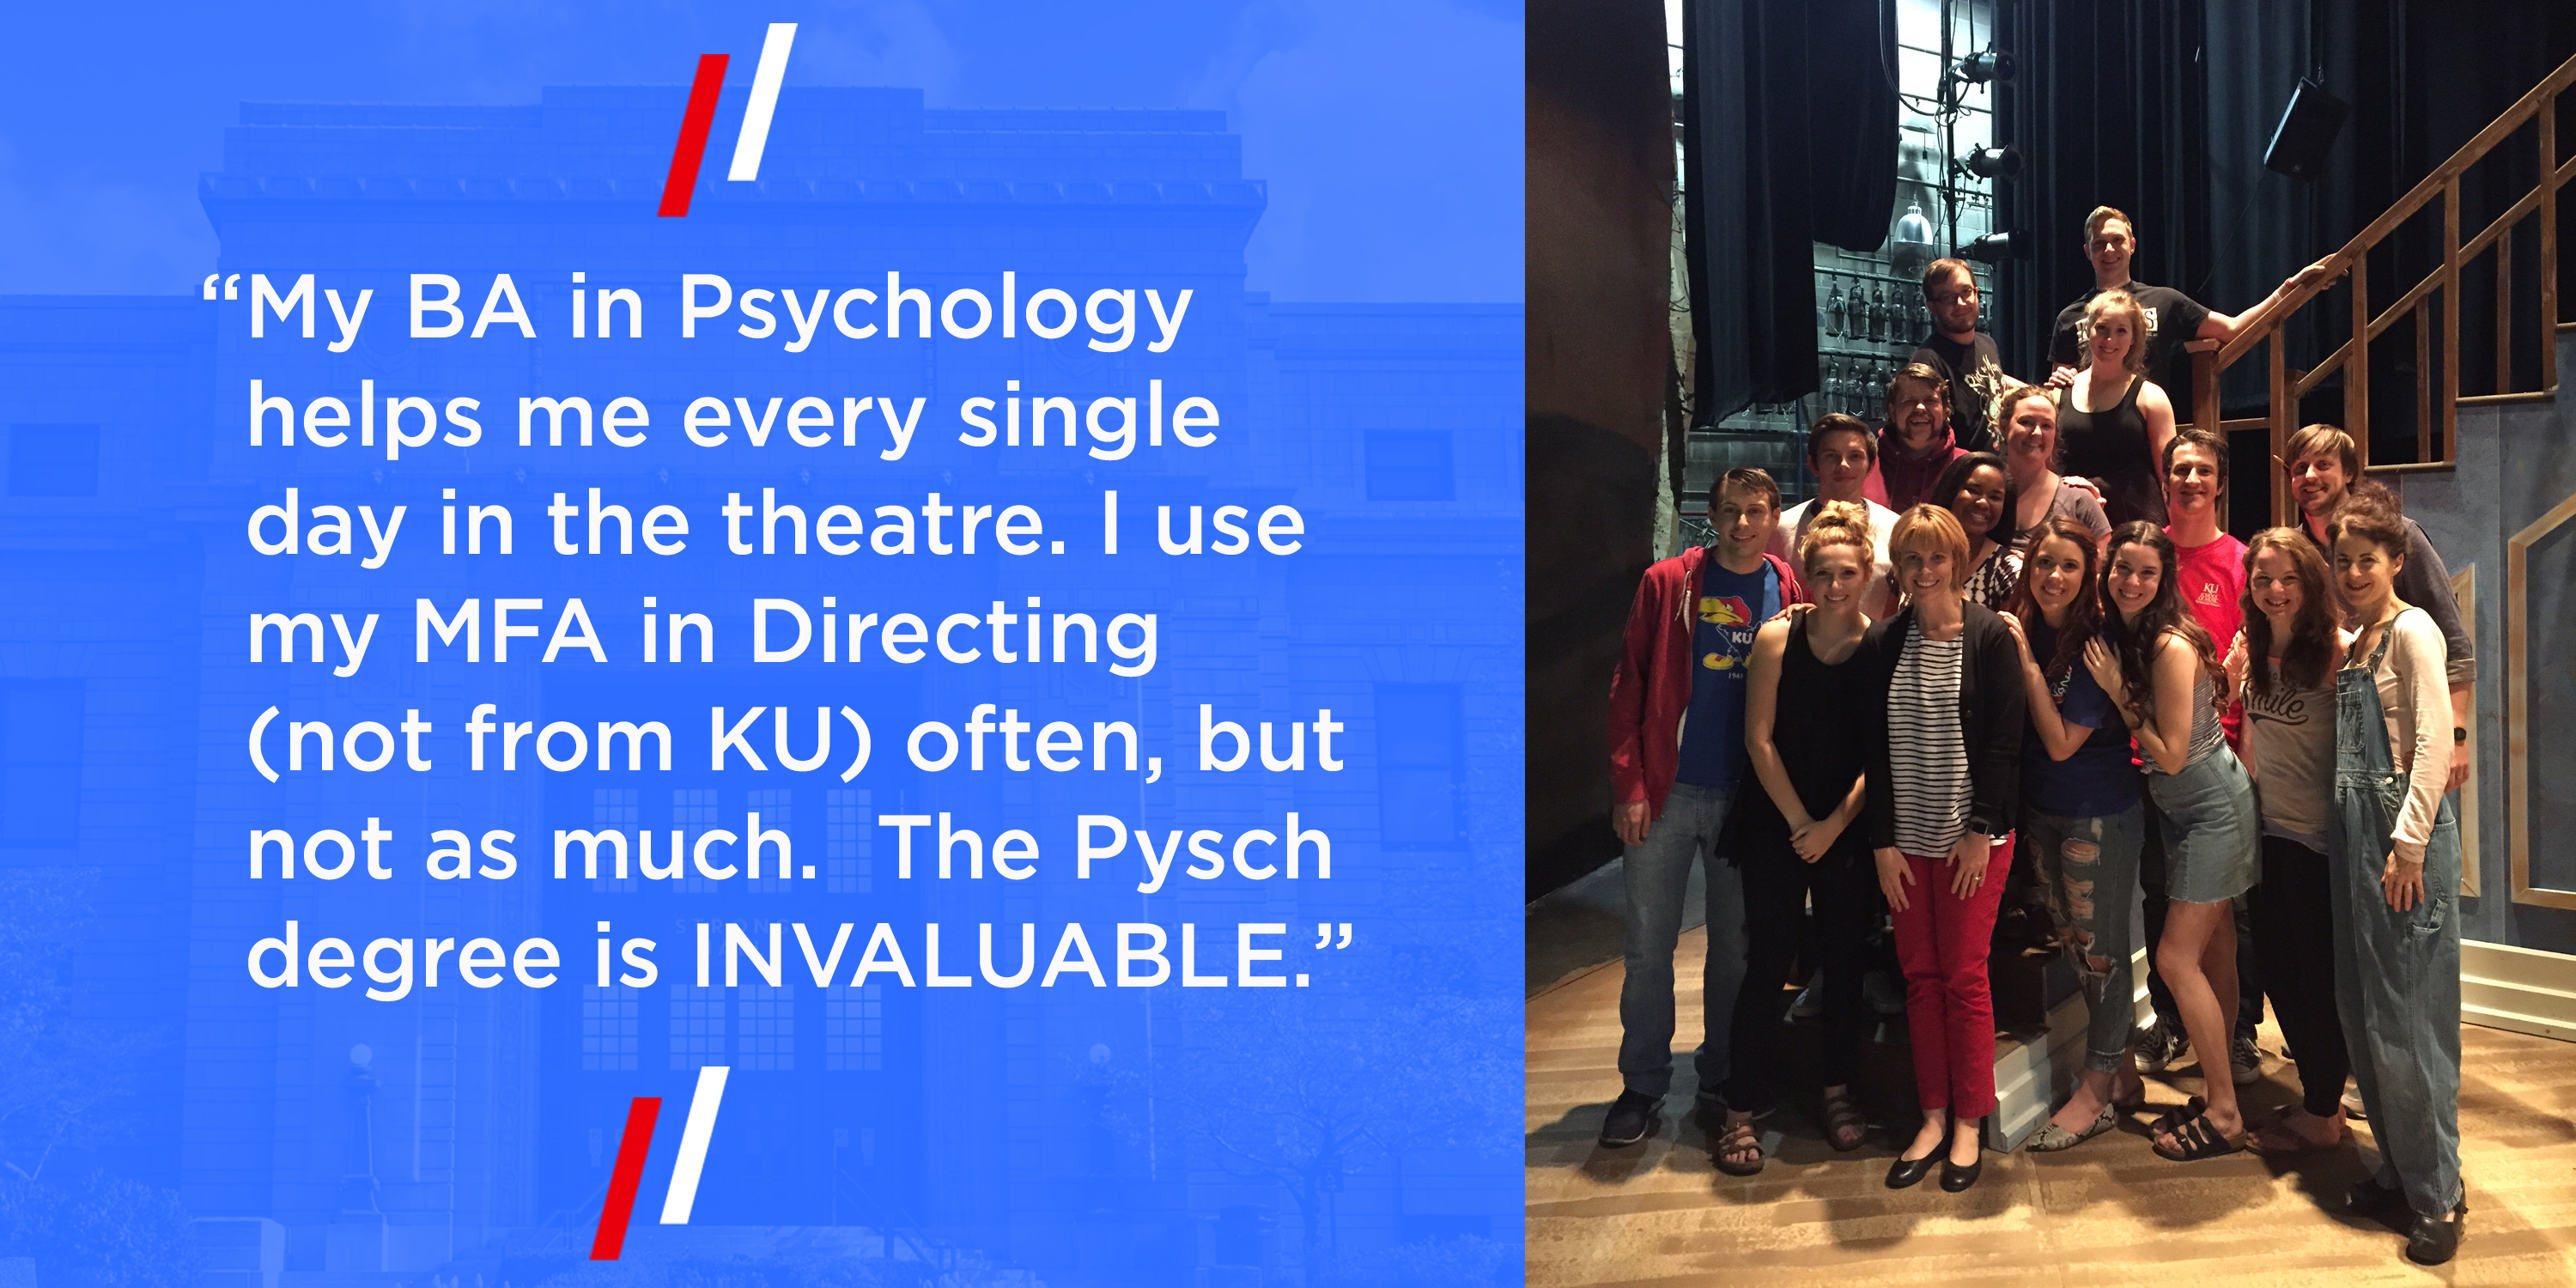 “My BA in Psychology helps me every single day in the theatre. I use my MFA in Directing (not from KU) often, but not as much.  The Pysch degree is INVALUABLE.”